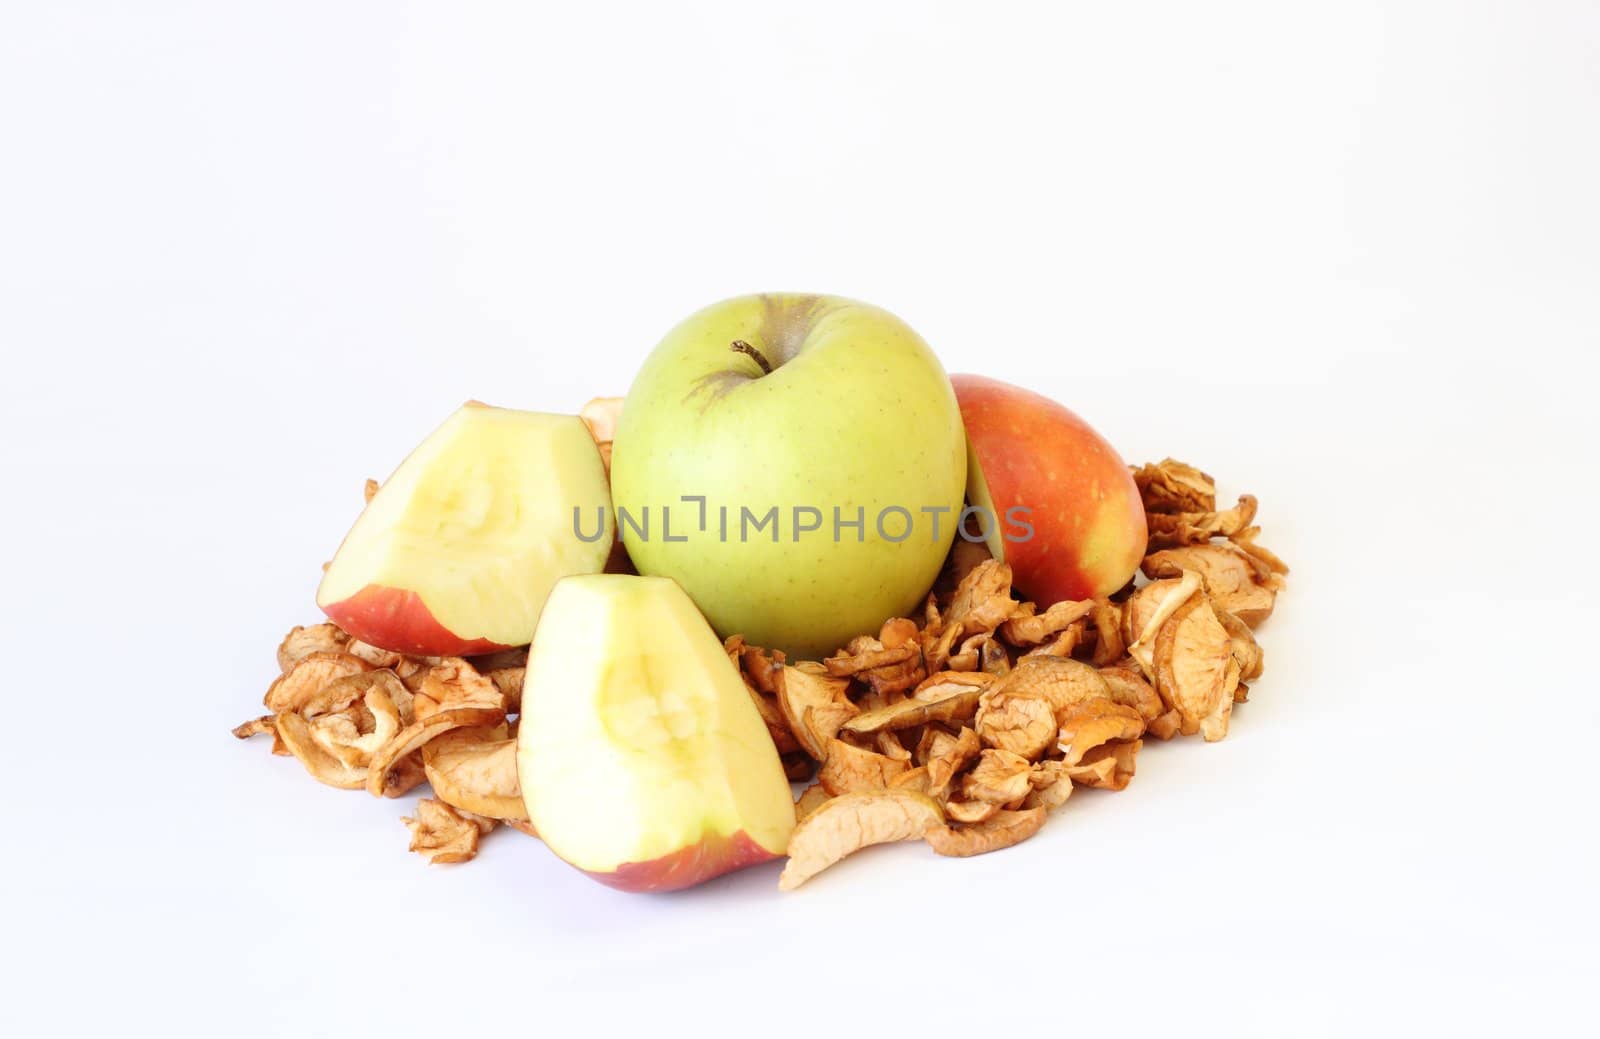 green sliced and dried apples on white background